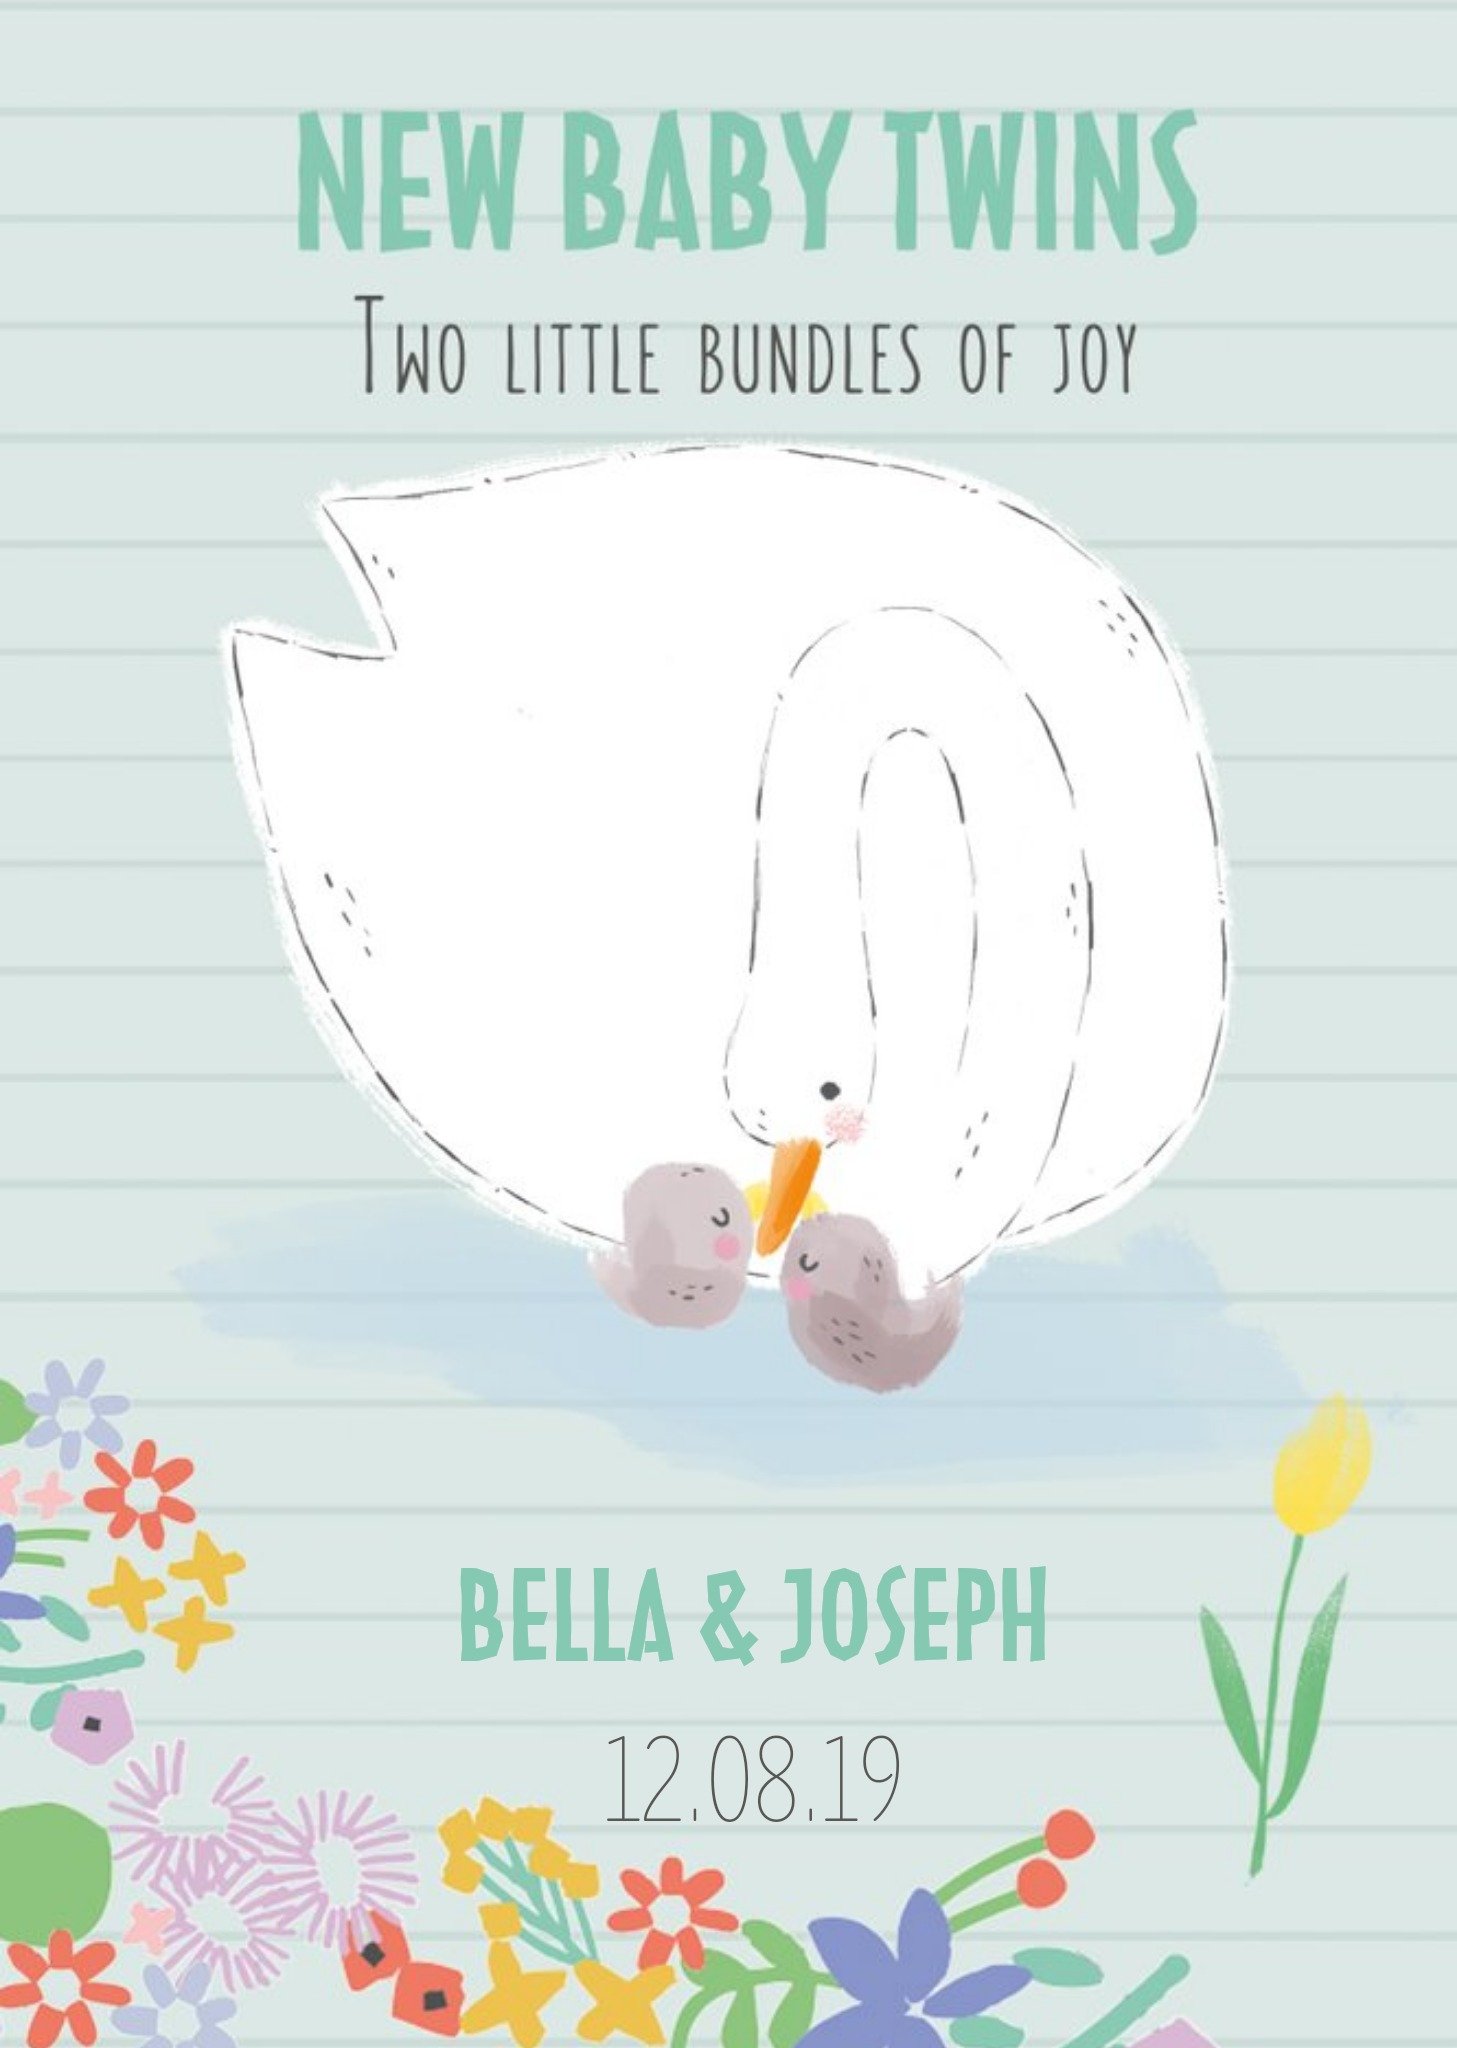 Moonpig Cute Parent And Baby Swan Twins Two Little Bundles Of Joy New Baby Card Ecard